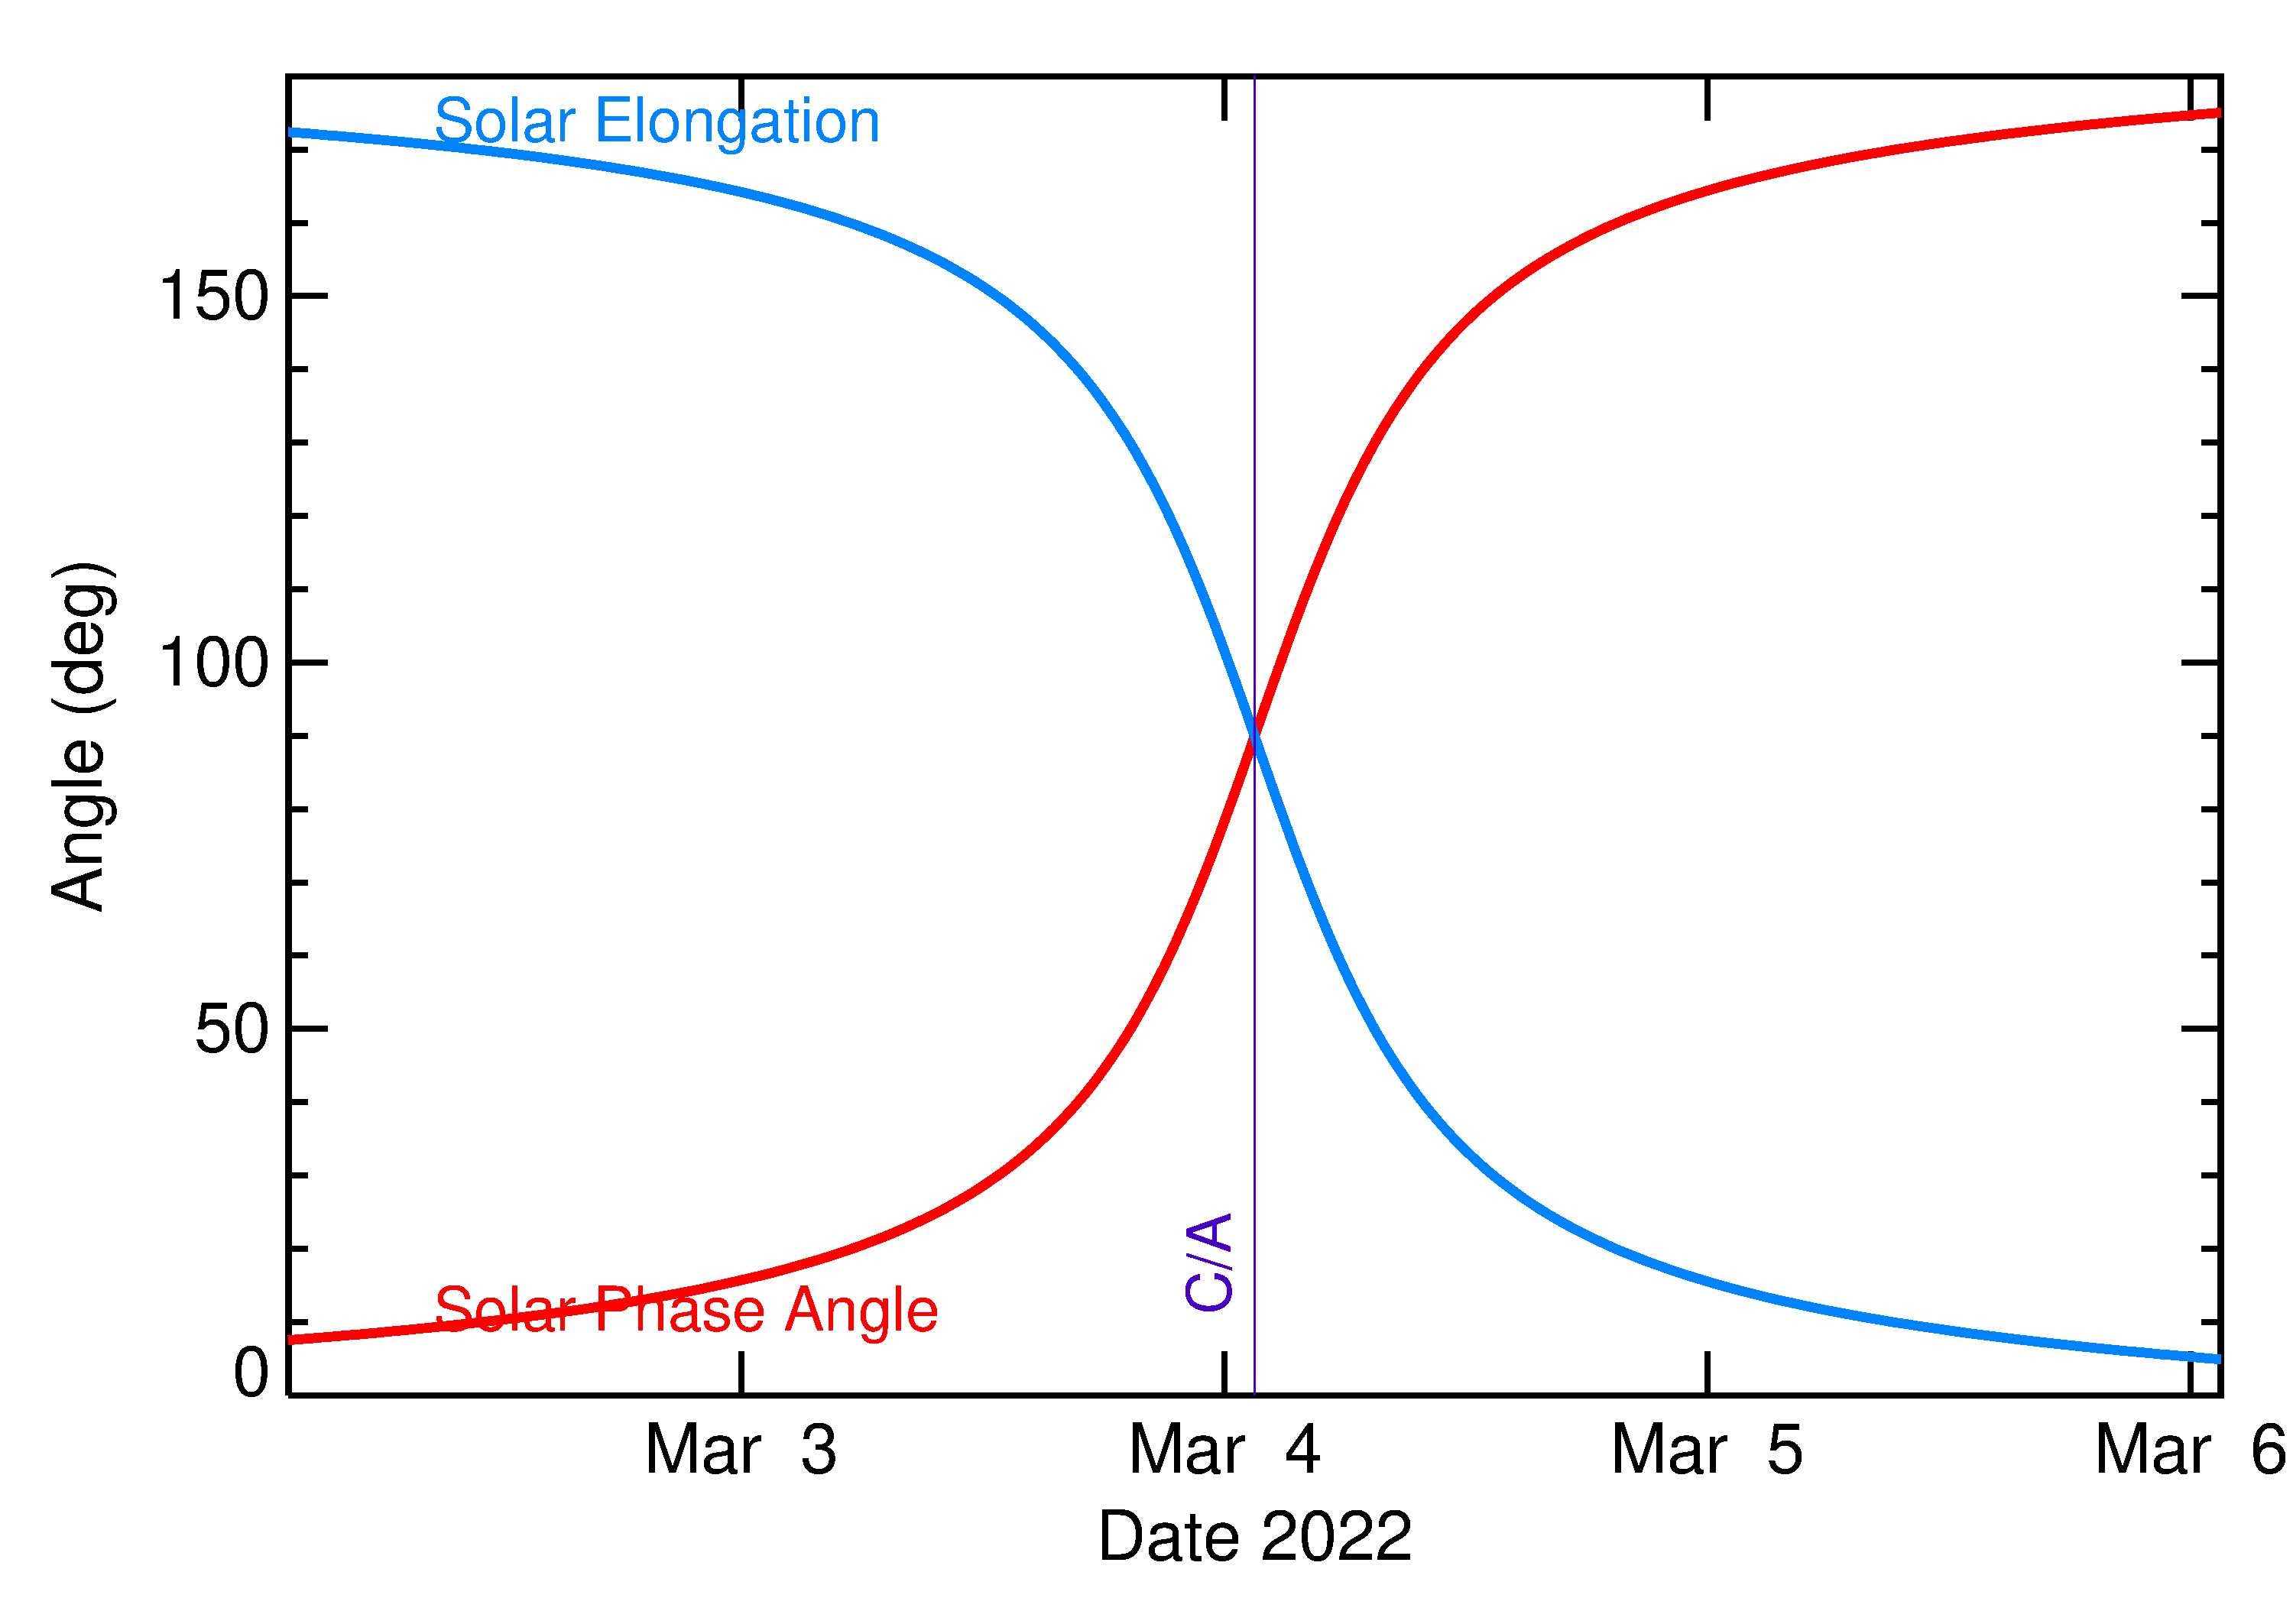 Solar Elongation and Solar Phase Angle of 2022 EF1 in the days around closest approach